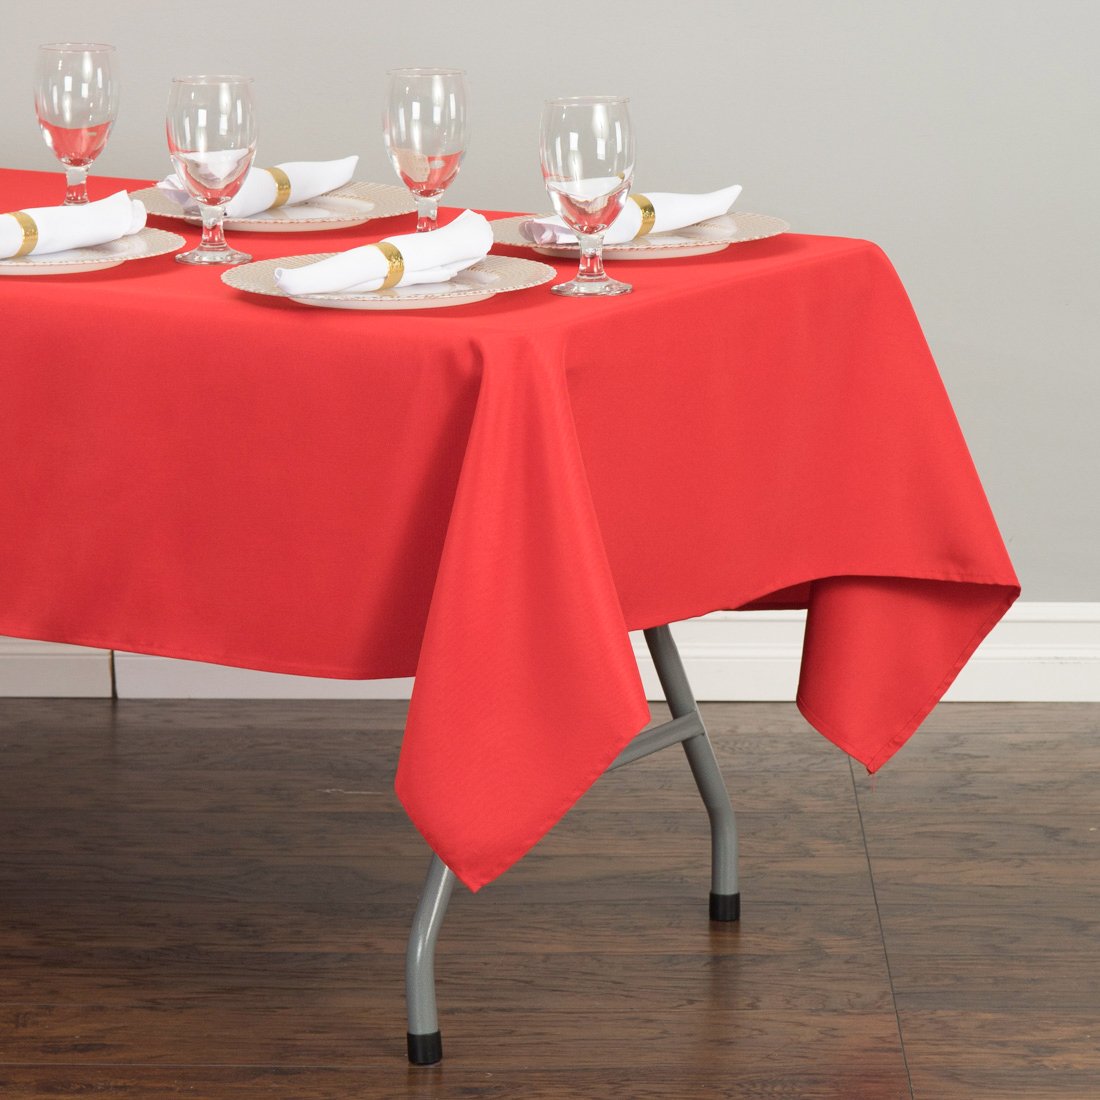 60 by 102 in. Tablecloths